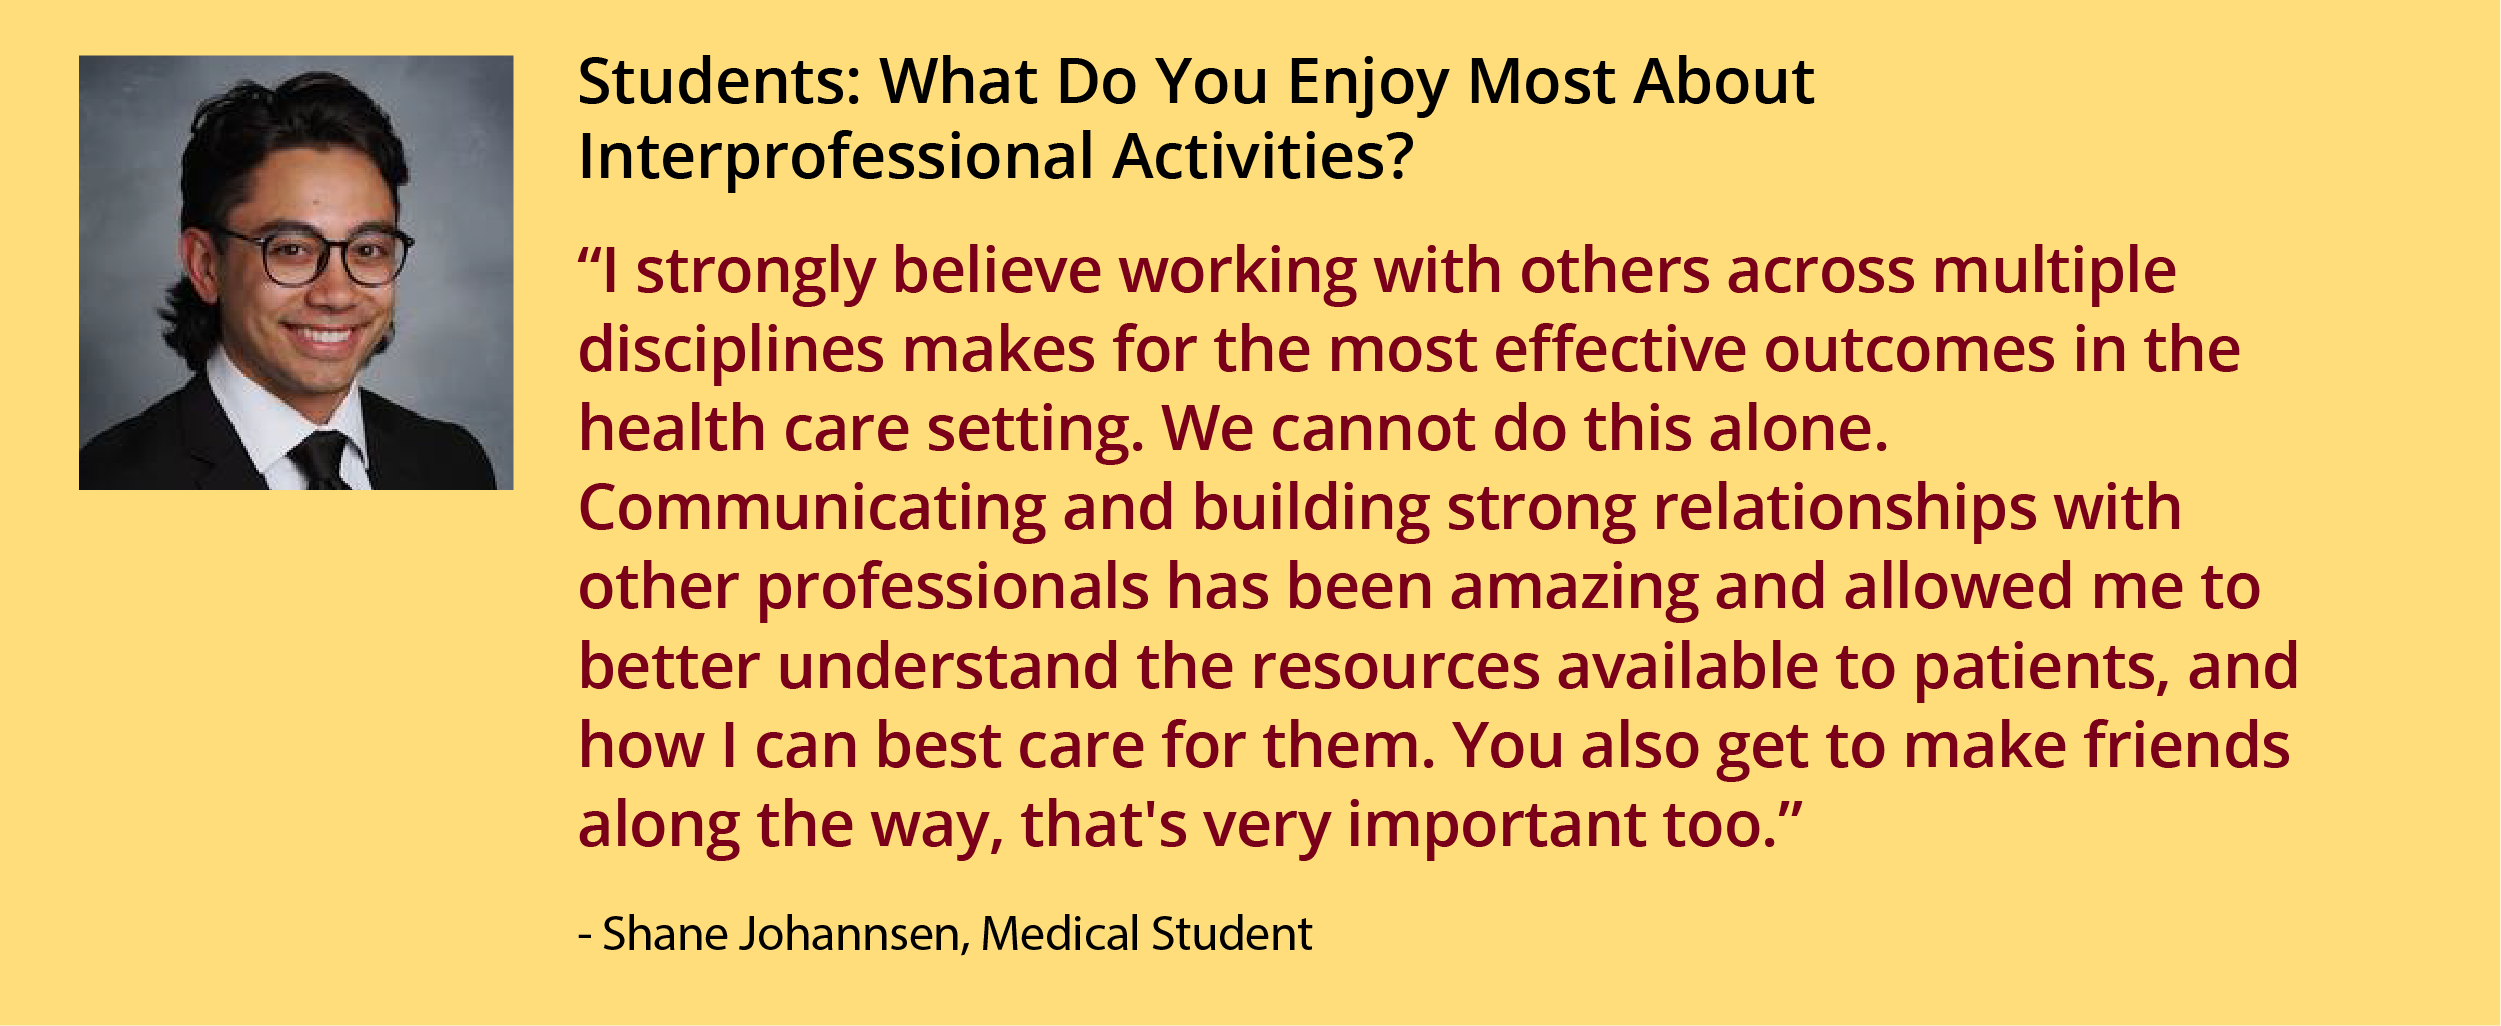 Students: What Do You Enjoy Most About Interprofessional Activities?